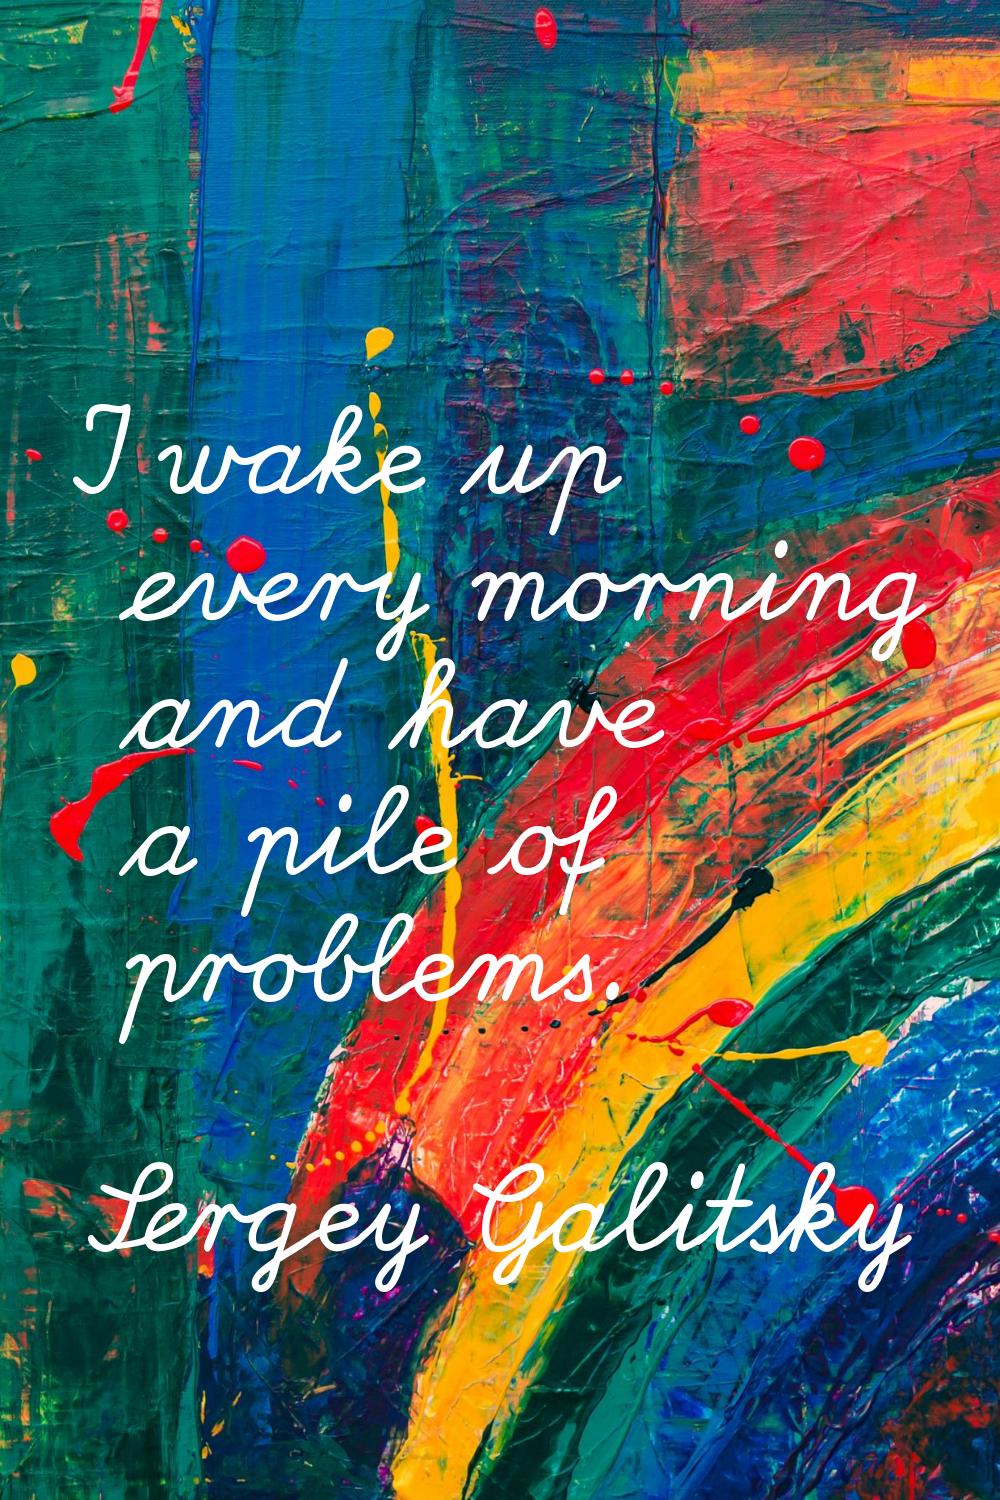 I wake up every morning and have a pile of problems.